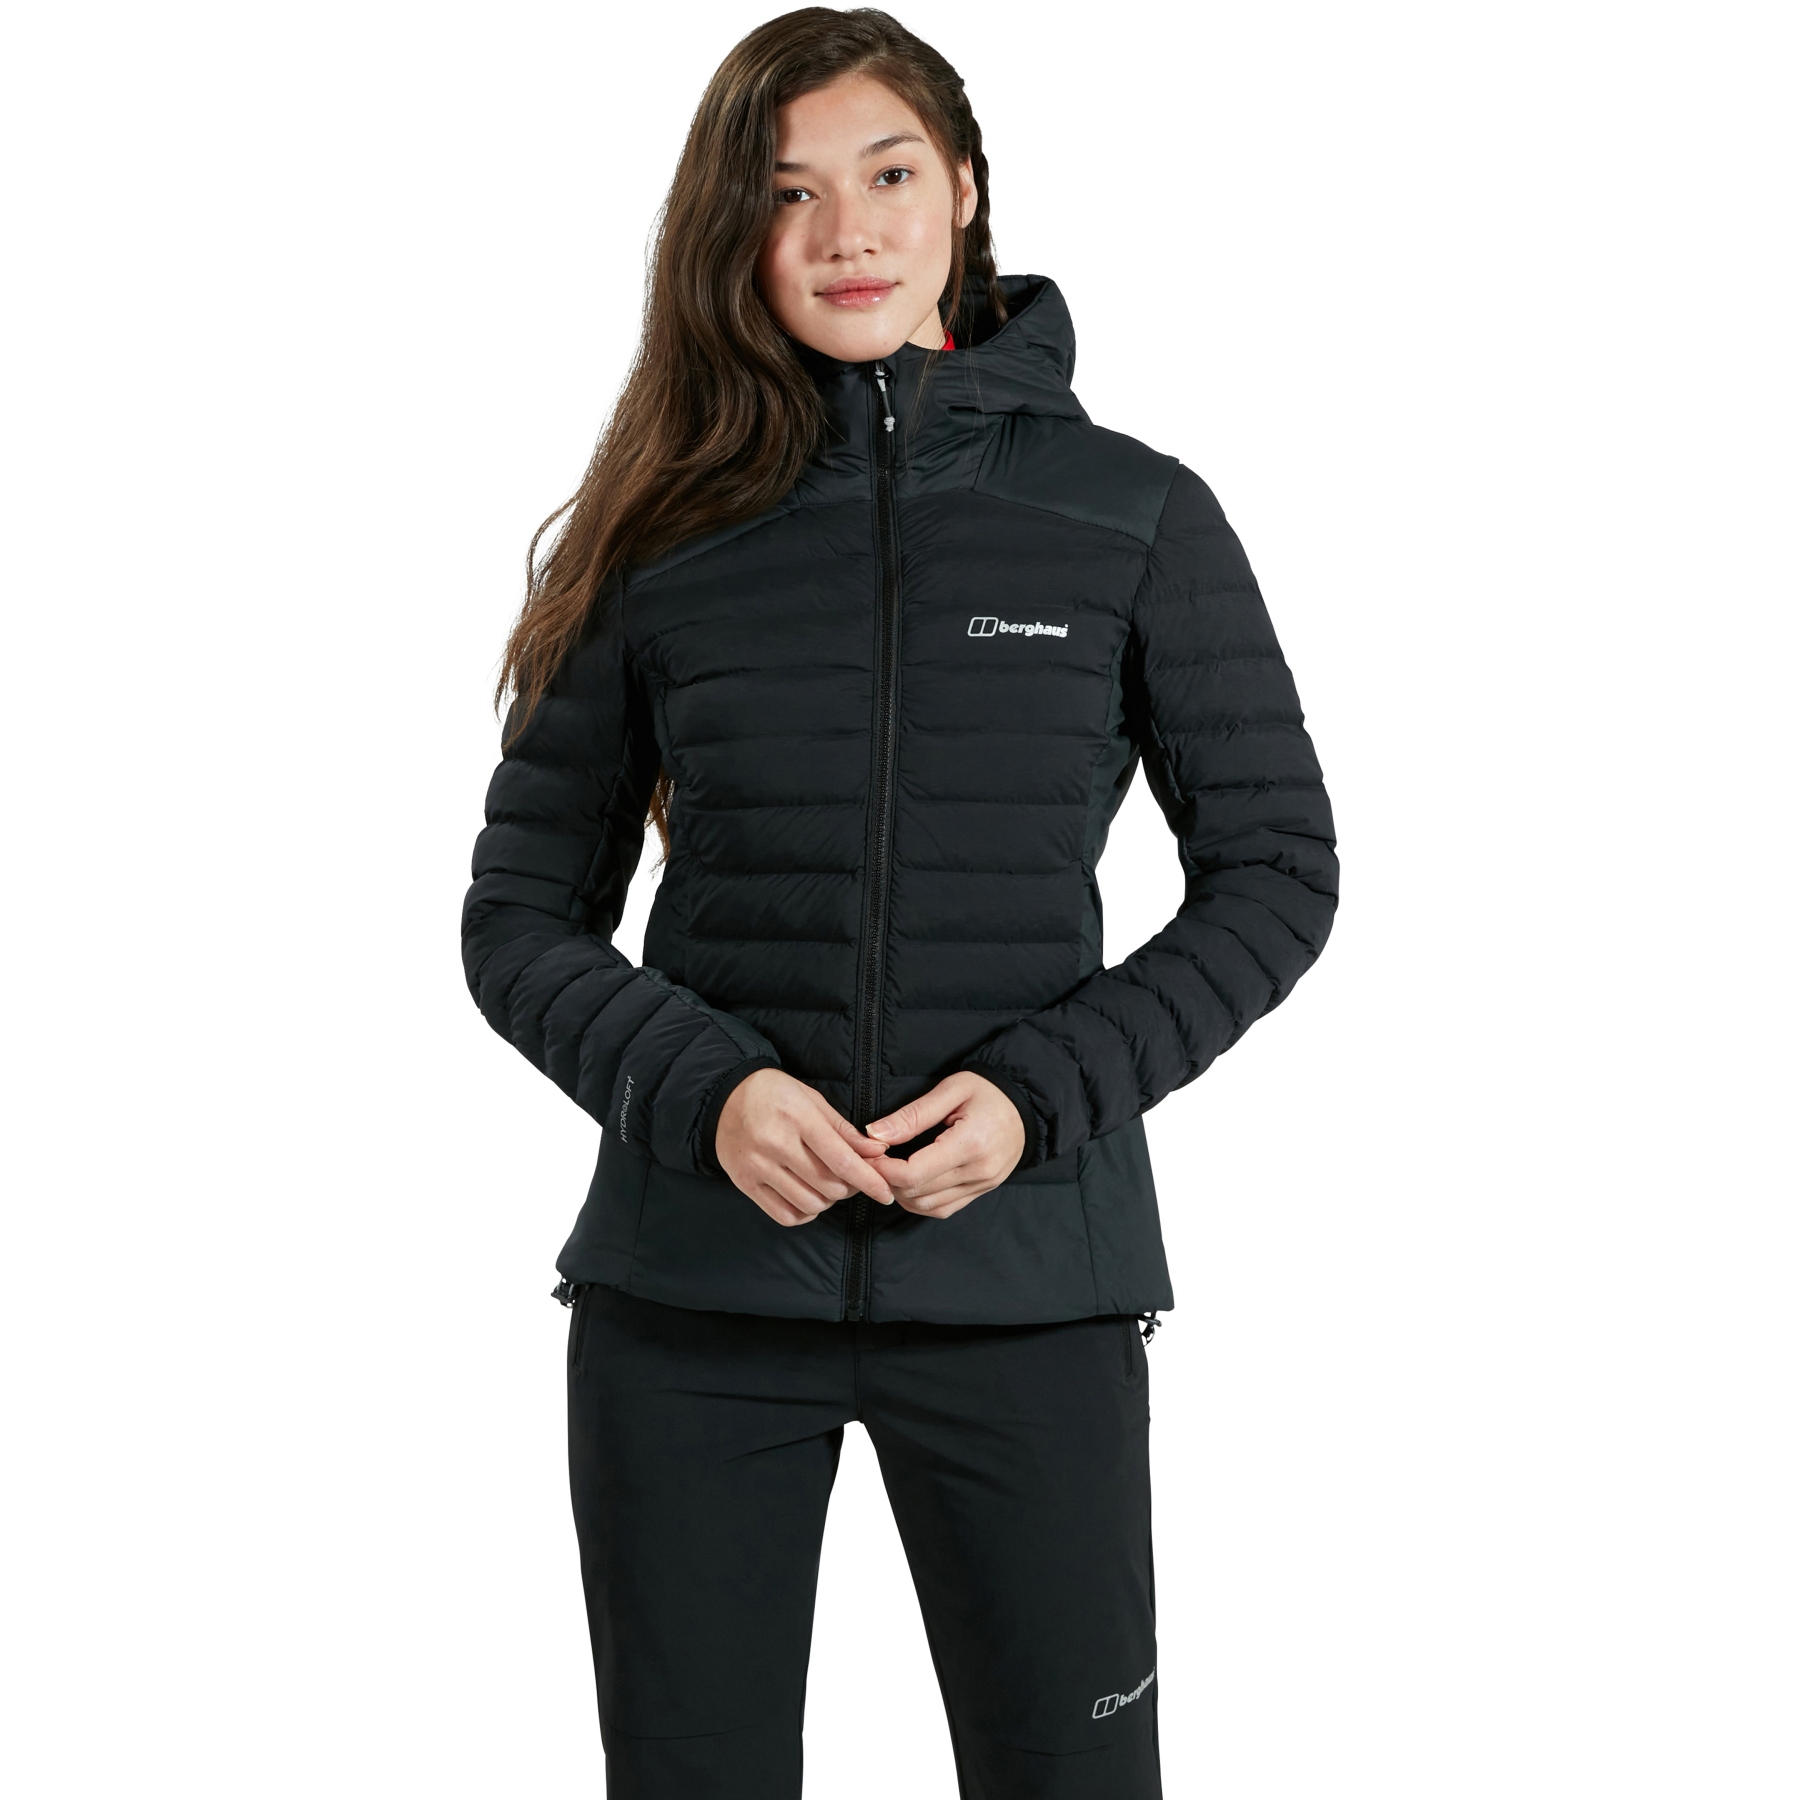 Picture of Berghaus Affine Insulated Jacket Women - Black/Black